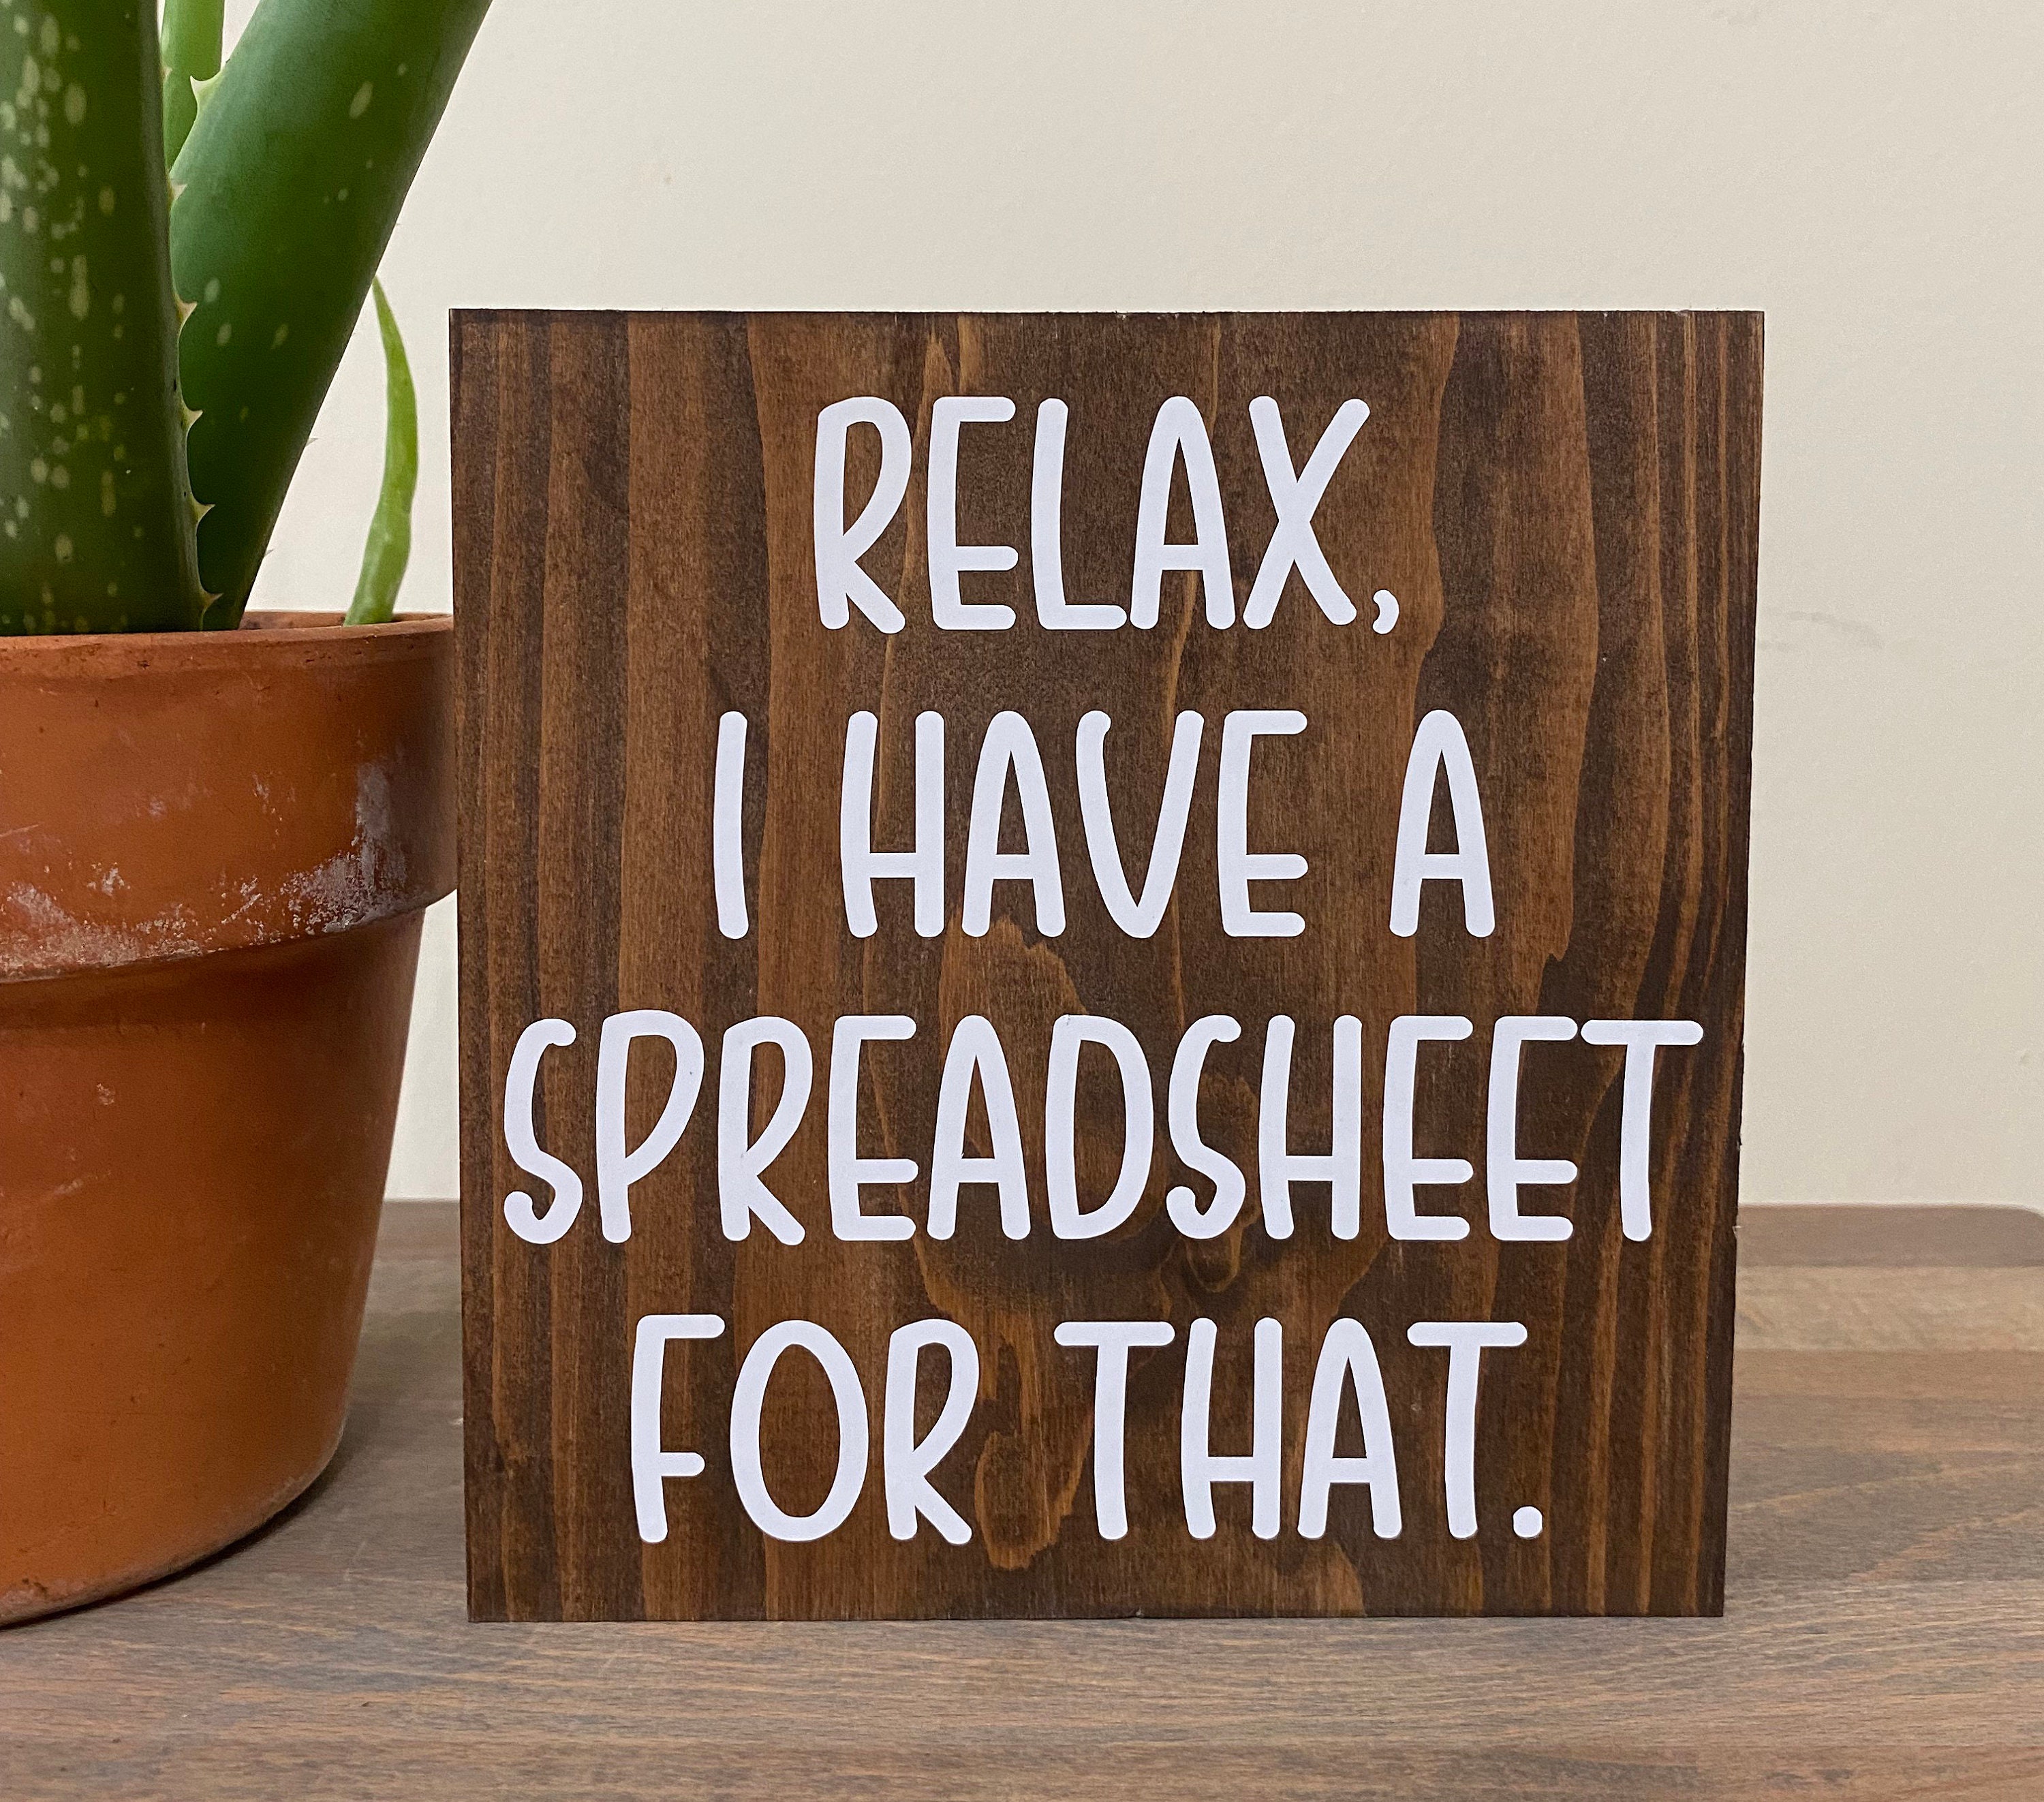 Office Decor for Women Desk - Cute Desk Decor - This Calls for a  Spreadsheet - Gifts for Boss, Boss Lady Women Friend Coworker Employees-  Plaque Sign